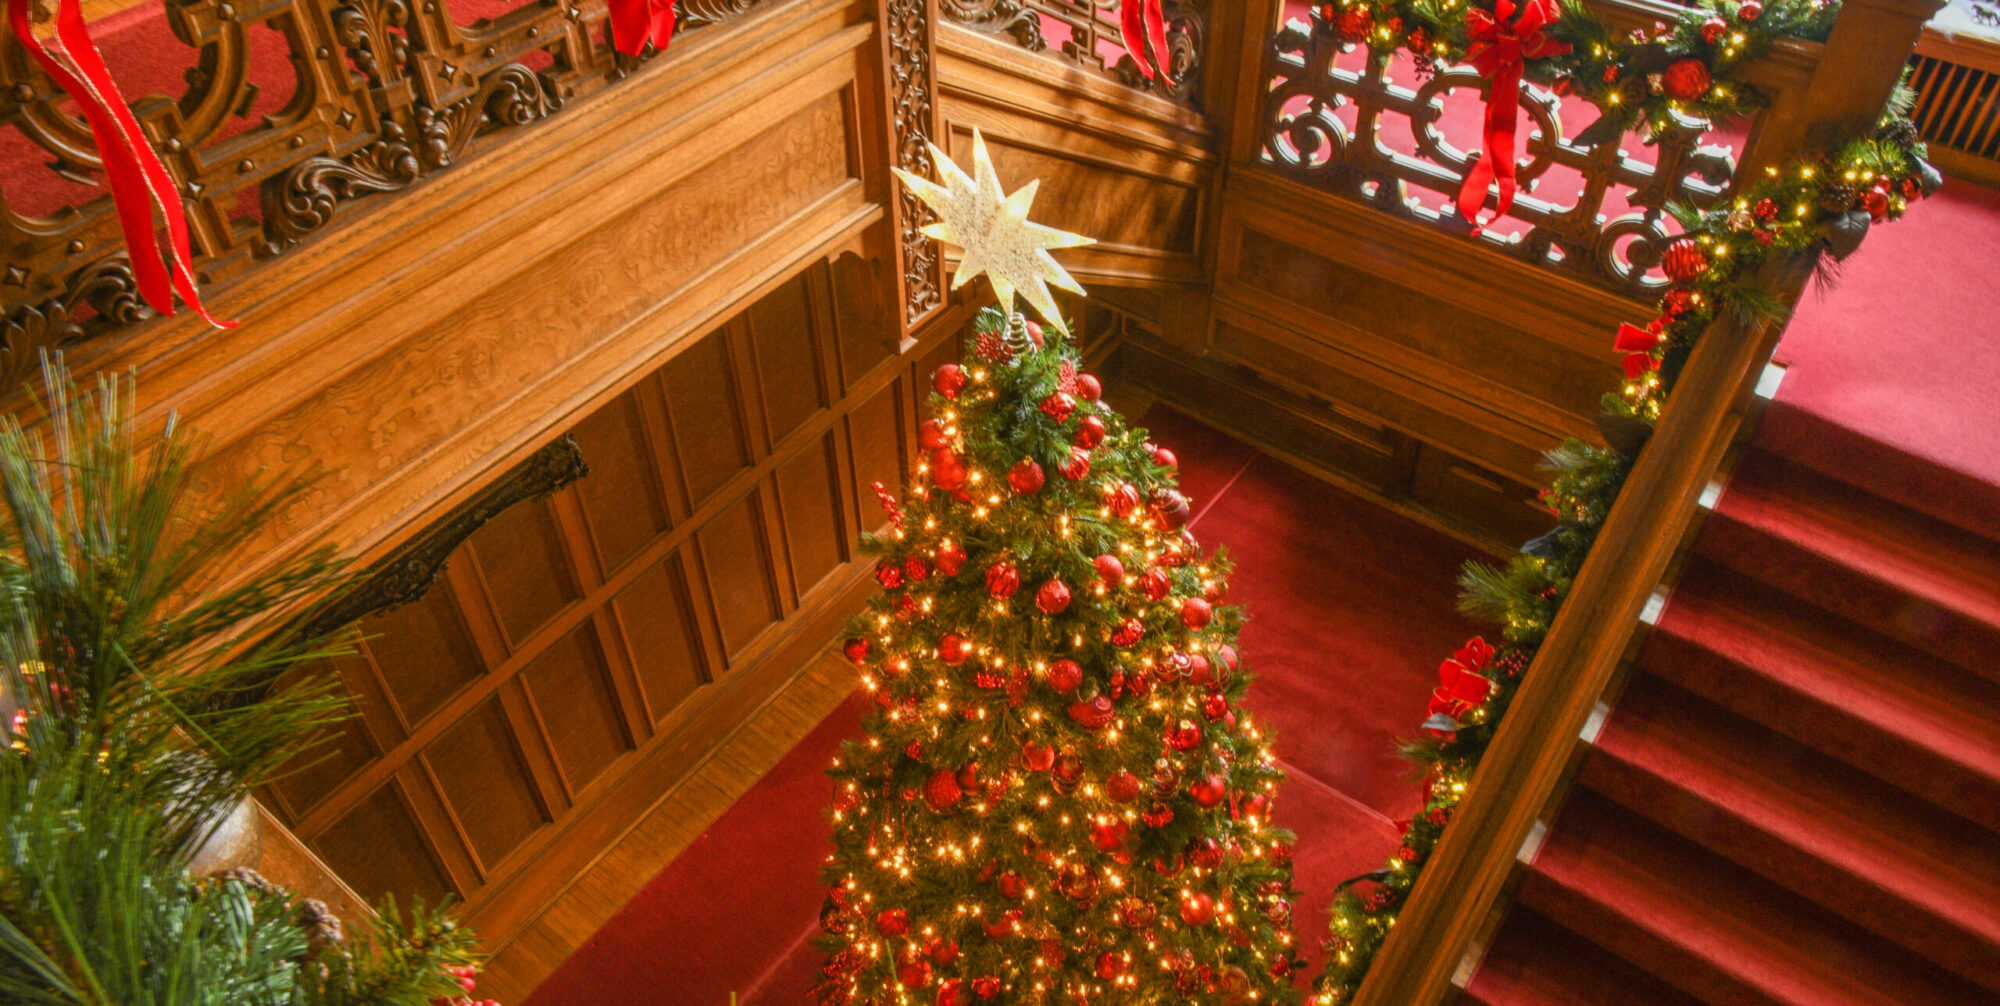 A tall Christmas tree with a white star stands in between stairs lined with red carpet and next to wooden railings lined with green and red swag.